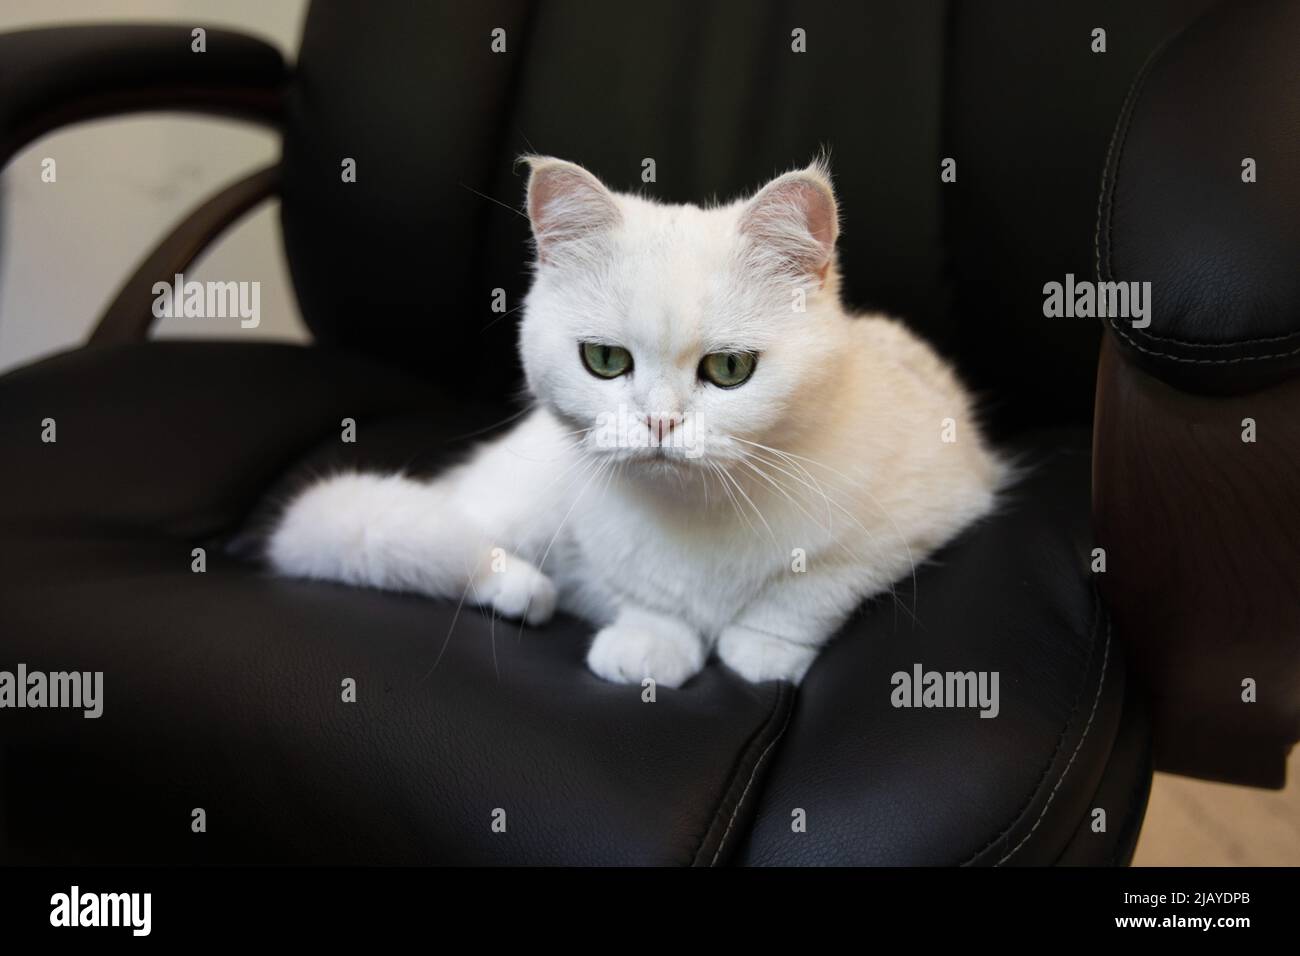 boss cat laying on the black office chair, white fluffy grumpy cat, who is the boss Stock Photo Alamy